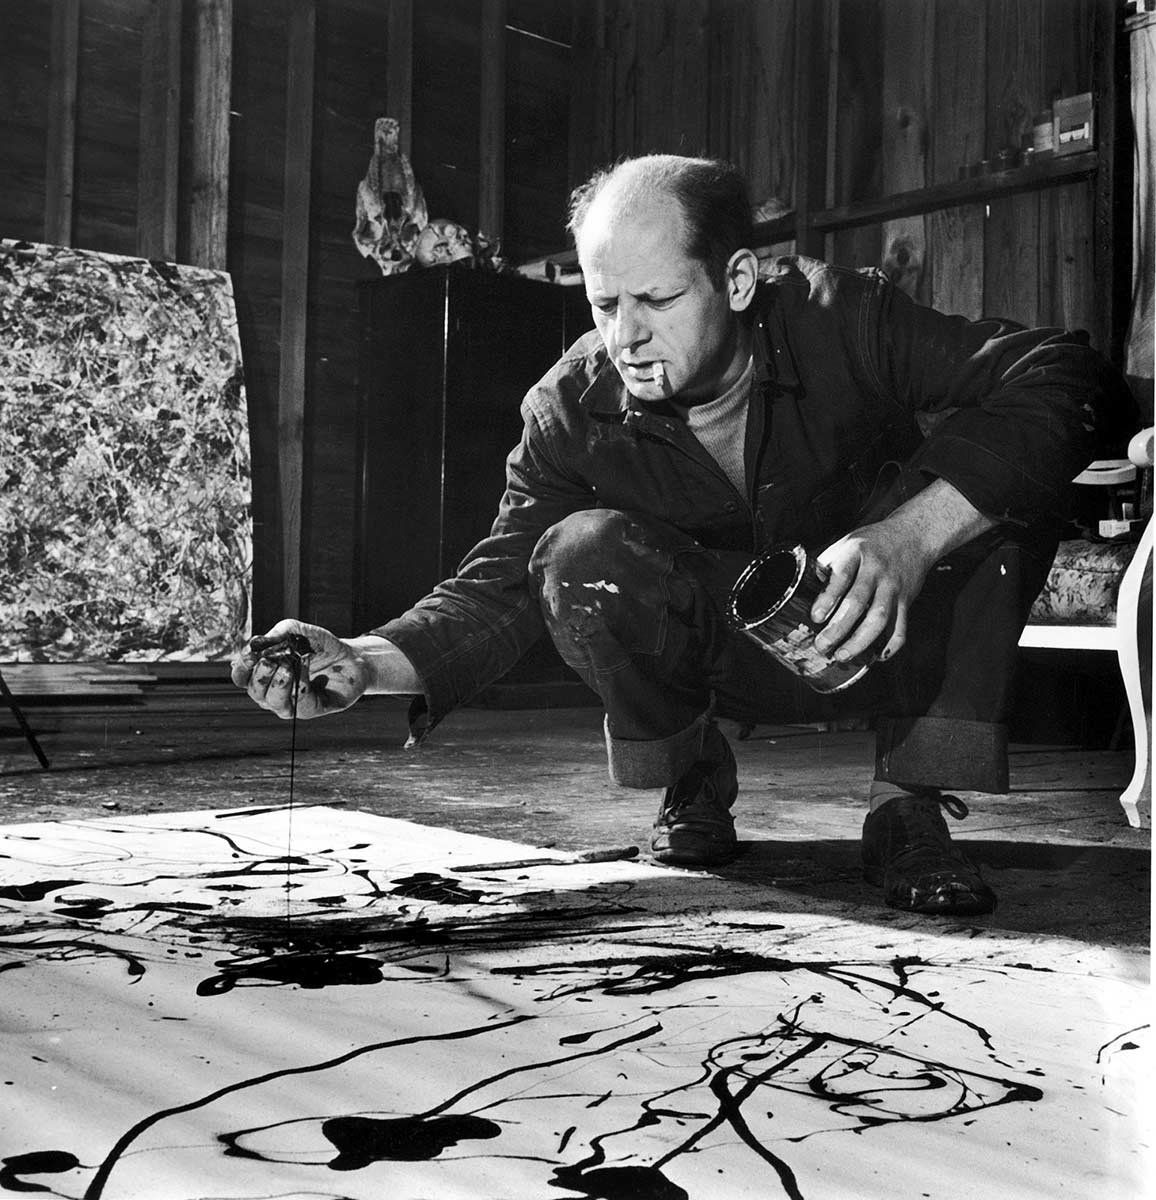 Black and white photo of balding, middle-aged man crouches by canvas spread on the floor. He has a cigarette in his mouth, a paint can in one hand. His other hand seems to be covered in paint. He is frowning intently at the canvas, which has a few splotches of dark paint on it.